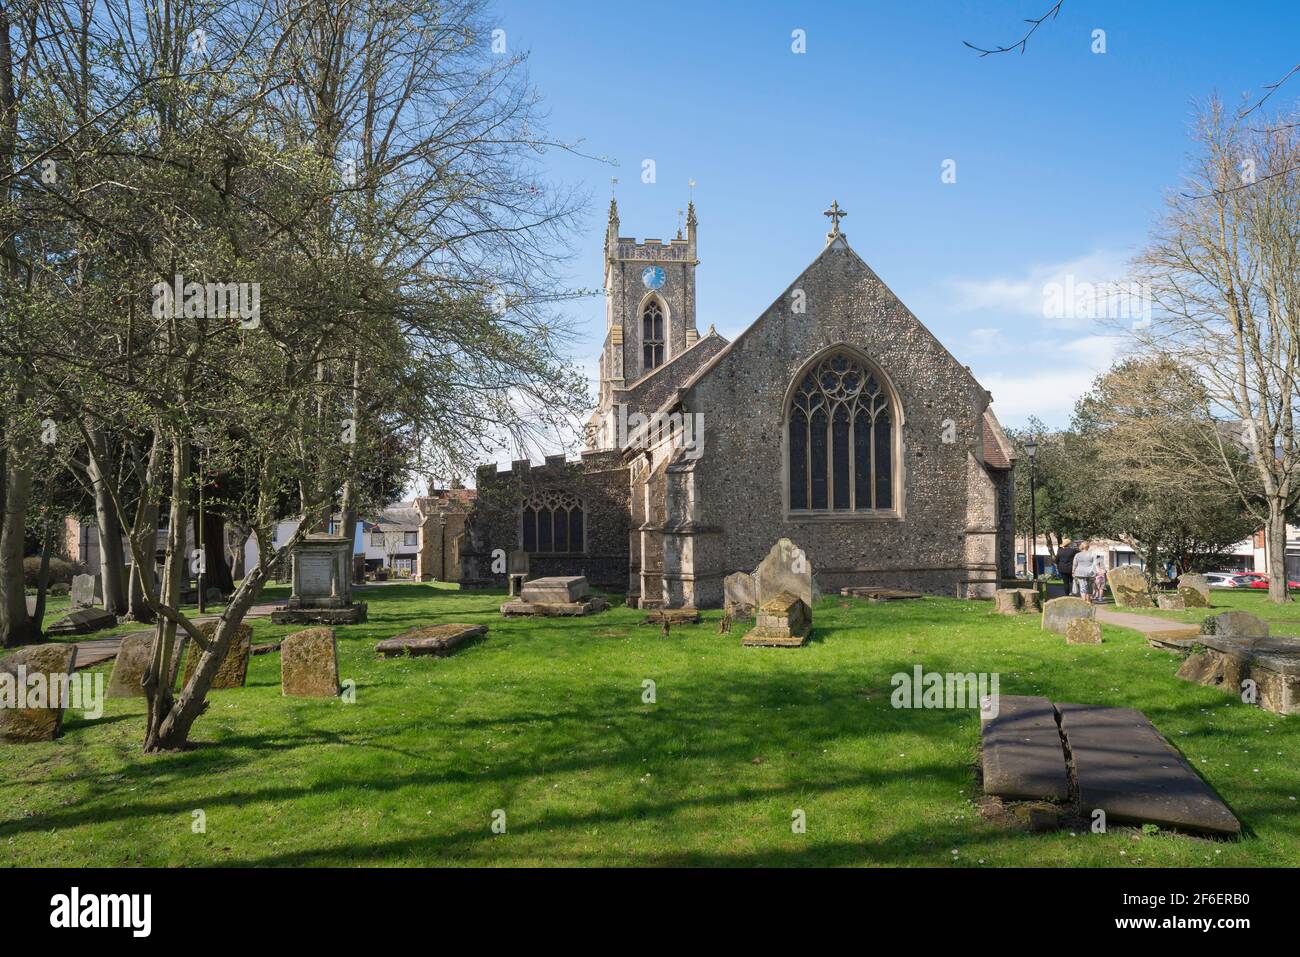 Halstead Church Essex, view of the church and churchyard of St Andrew's Parish Church in the historic Essex town of Halstead, UK Stock Photo